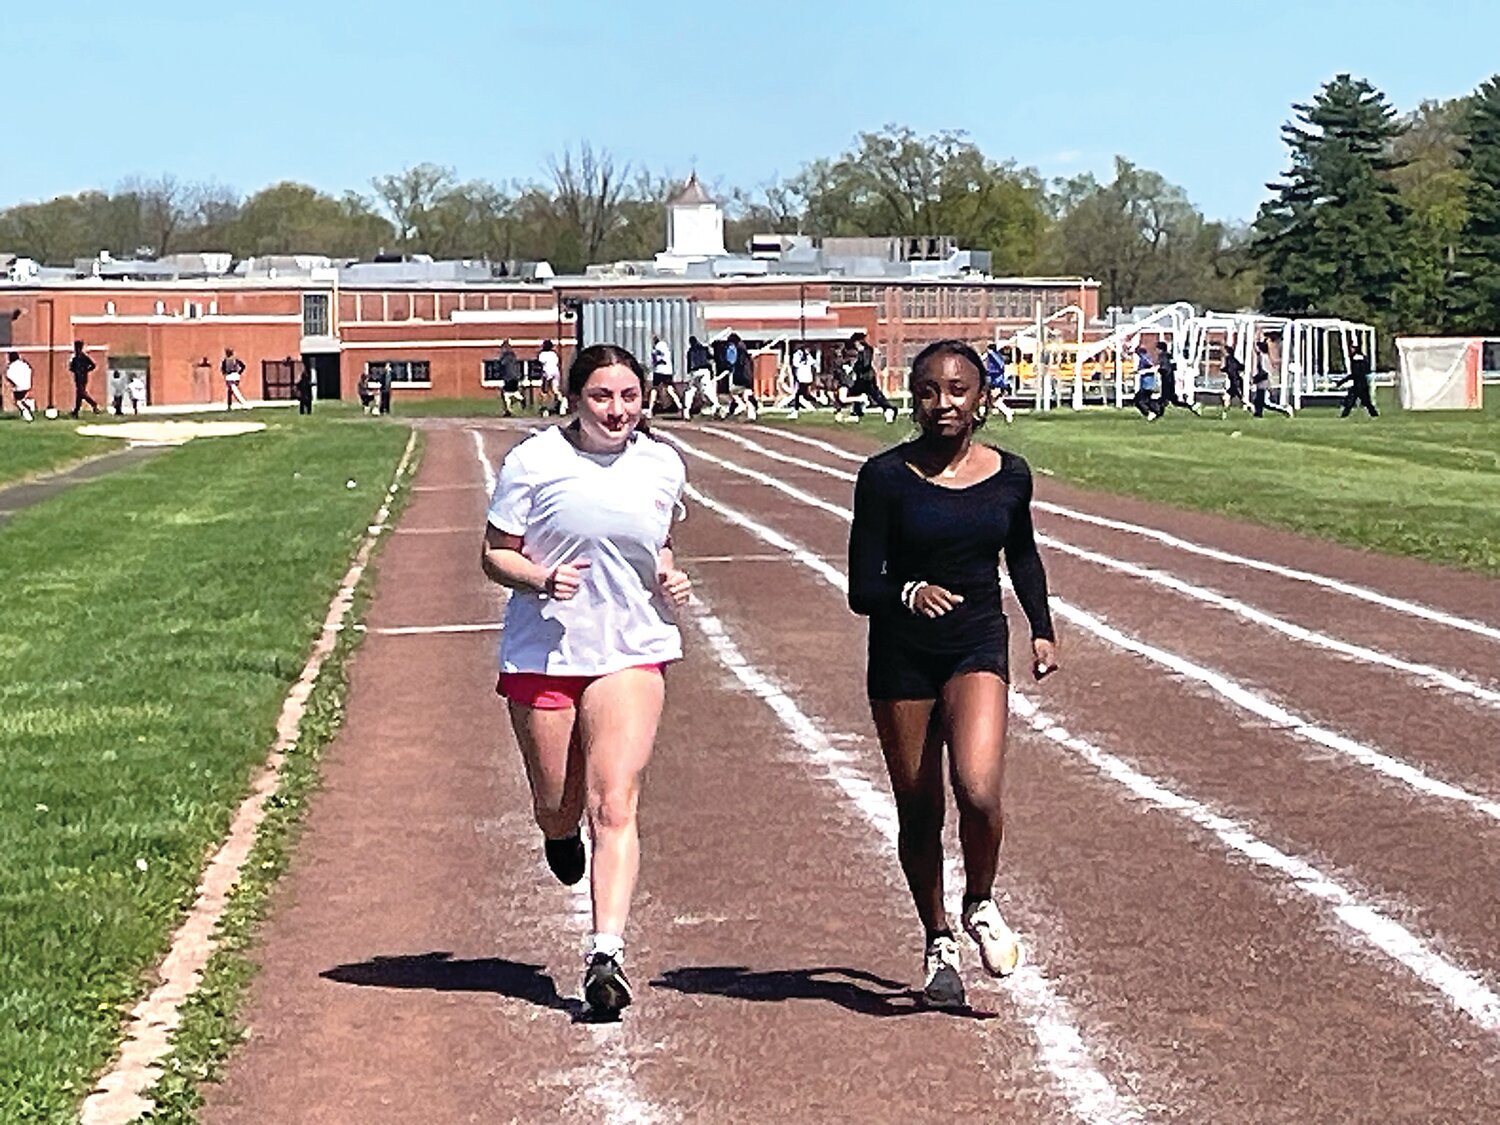 Hannah Avondoglio, left, and Mariah McKoy warm up for Monday’s practice at William Penn Middle School in Yardley.